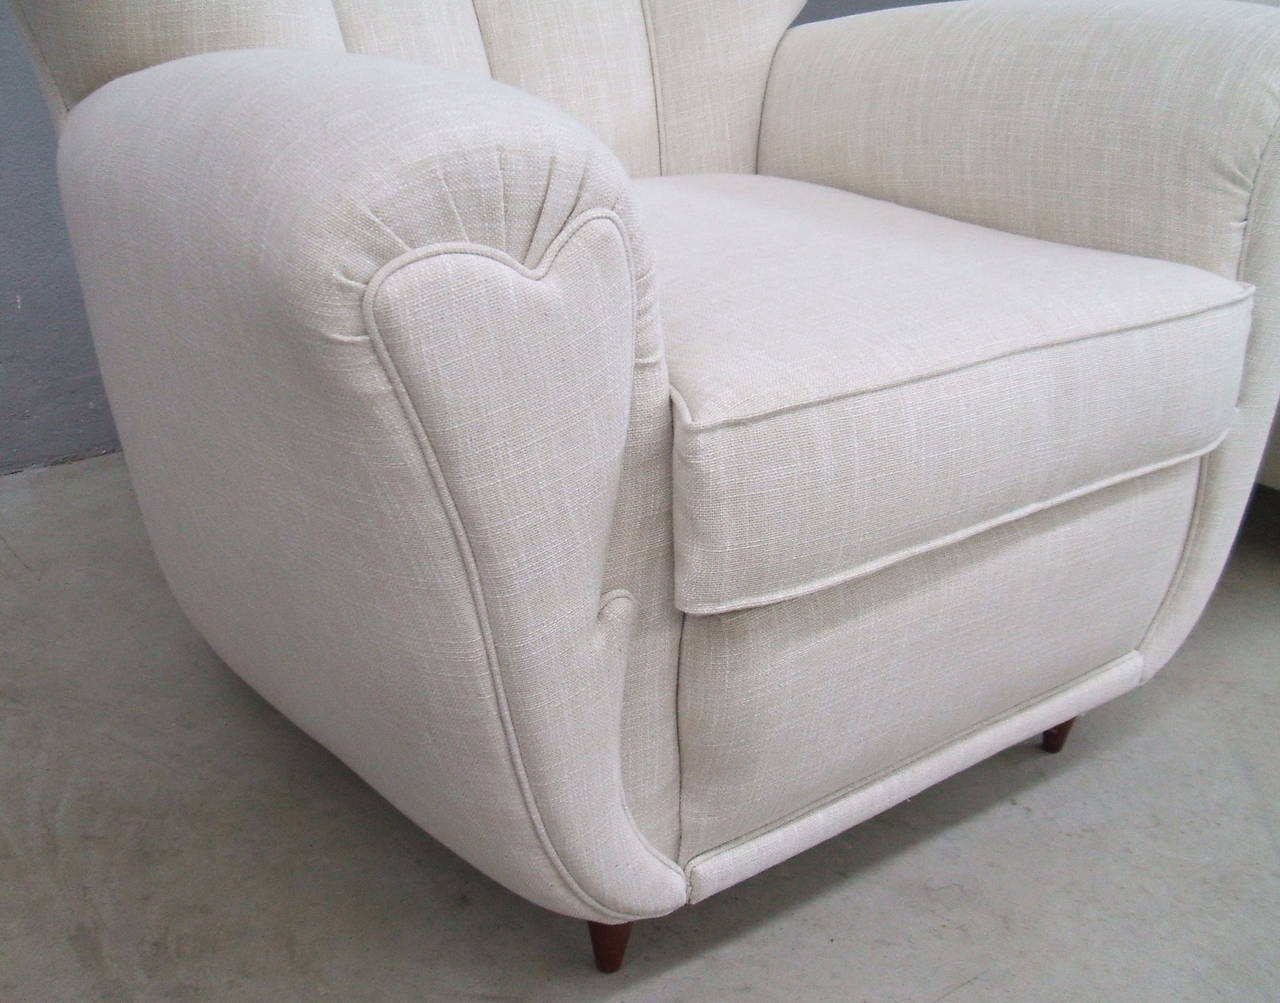 Very nice shape for these Italian Midcentury lounge chairs.
New upholstery: Linen.